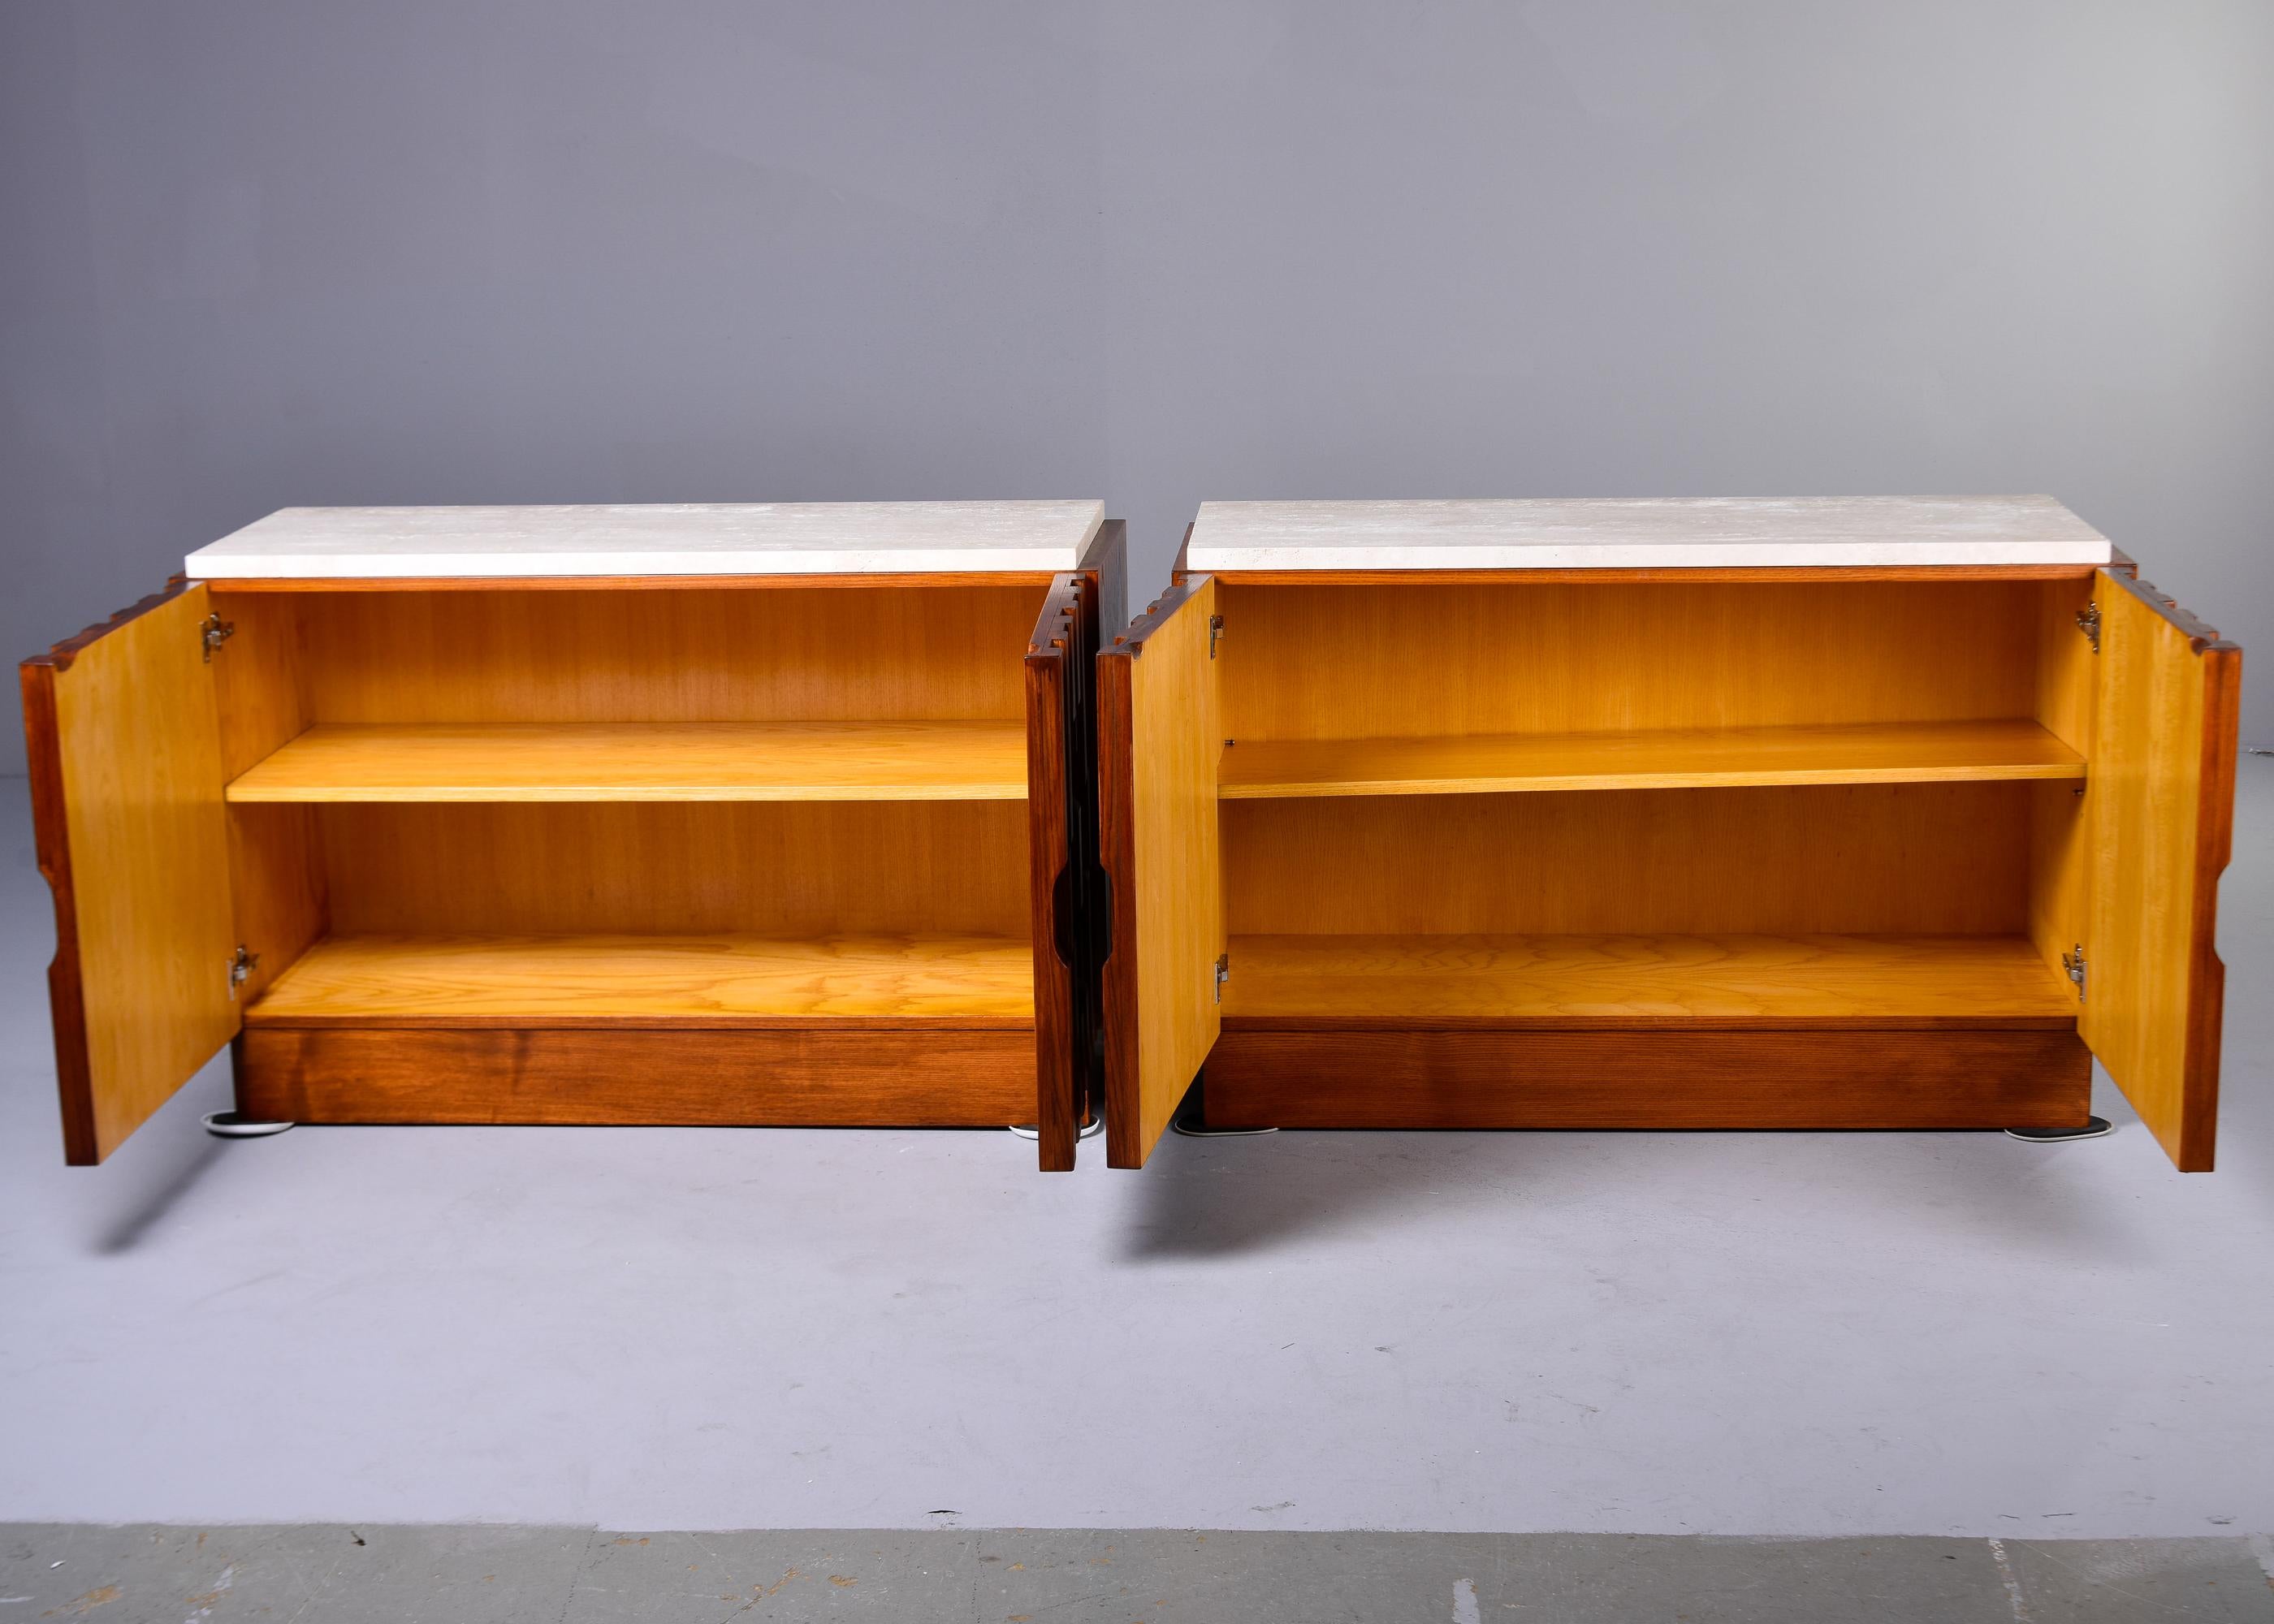 English Pair Bespoke Brutalist Style Oak Chests with Travertine Tops   Cabinets without  For Sale